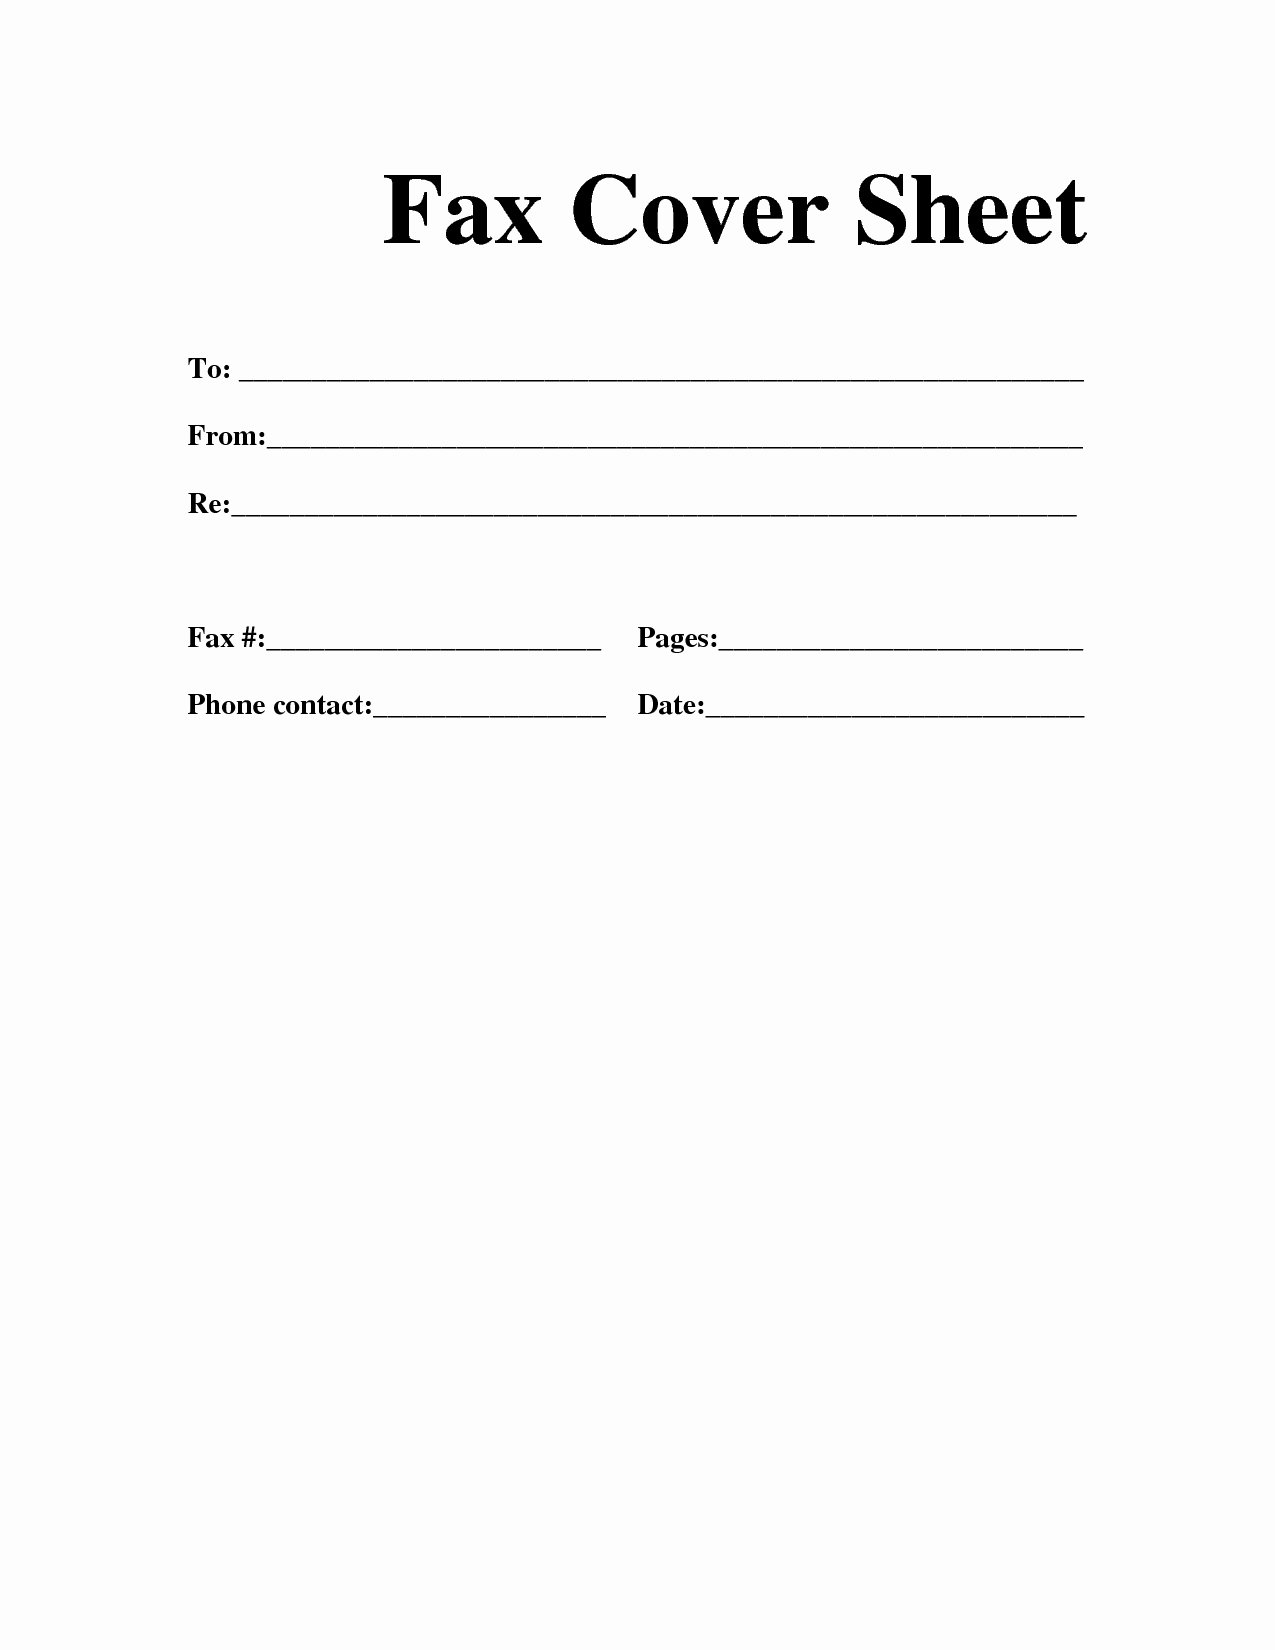 Blank Fax Cover Letter Sheets for Fax Cover Sheet Resume